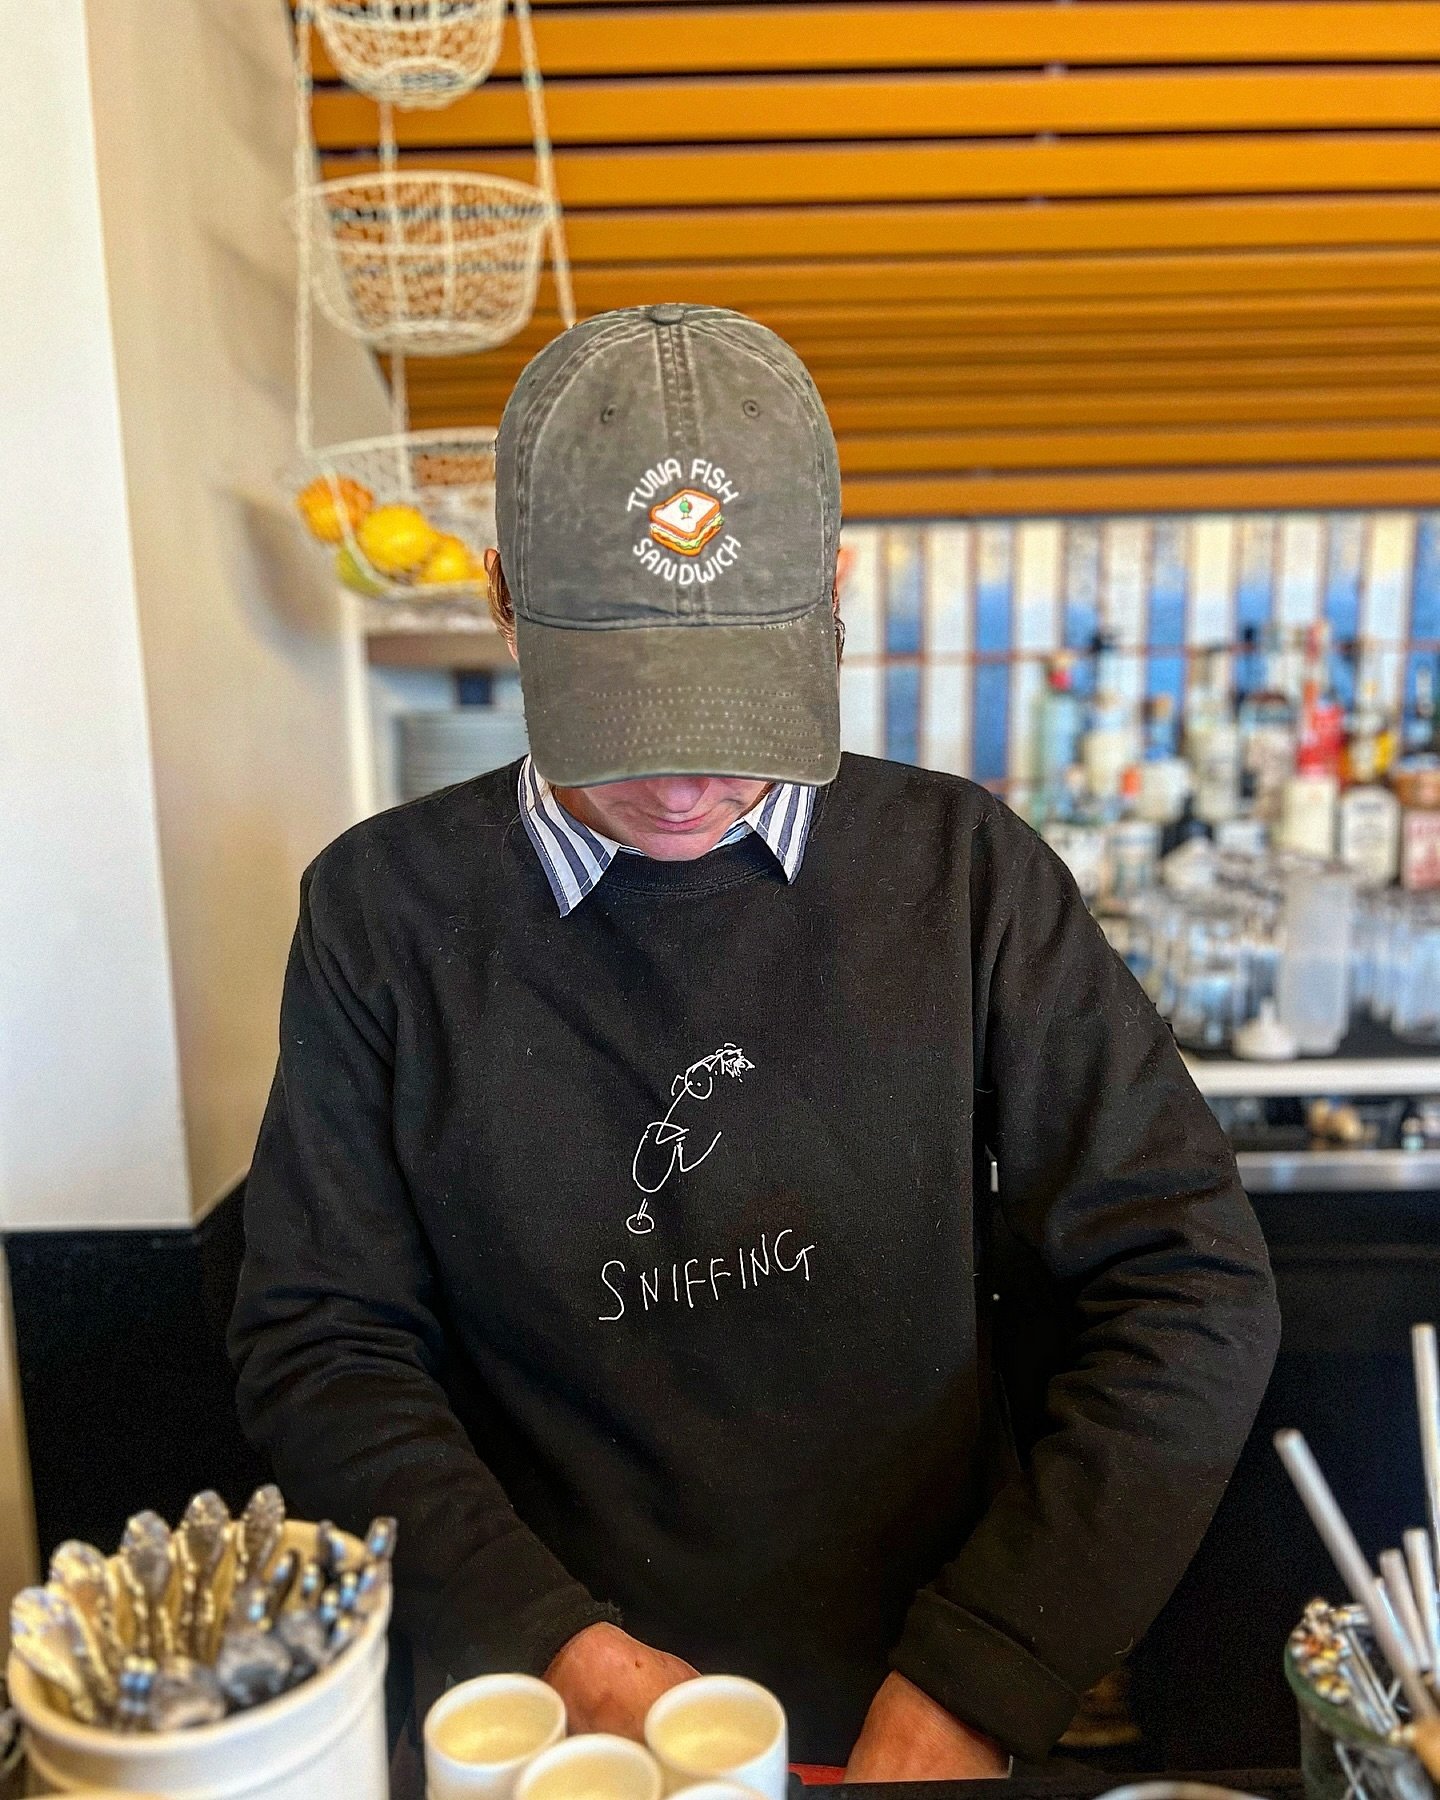 Hat arrived just in time&hellip; you heard it hear first! Our weekend daytime hours start TOMORROW. which means we&rsquo;ve got tuna melts coming at y&rsquo;all starting at 1pm (plus bloodys, oysters etc etc etc)

Starting this Saturday we are open 1